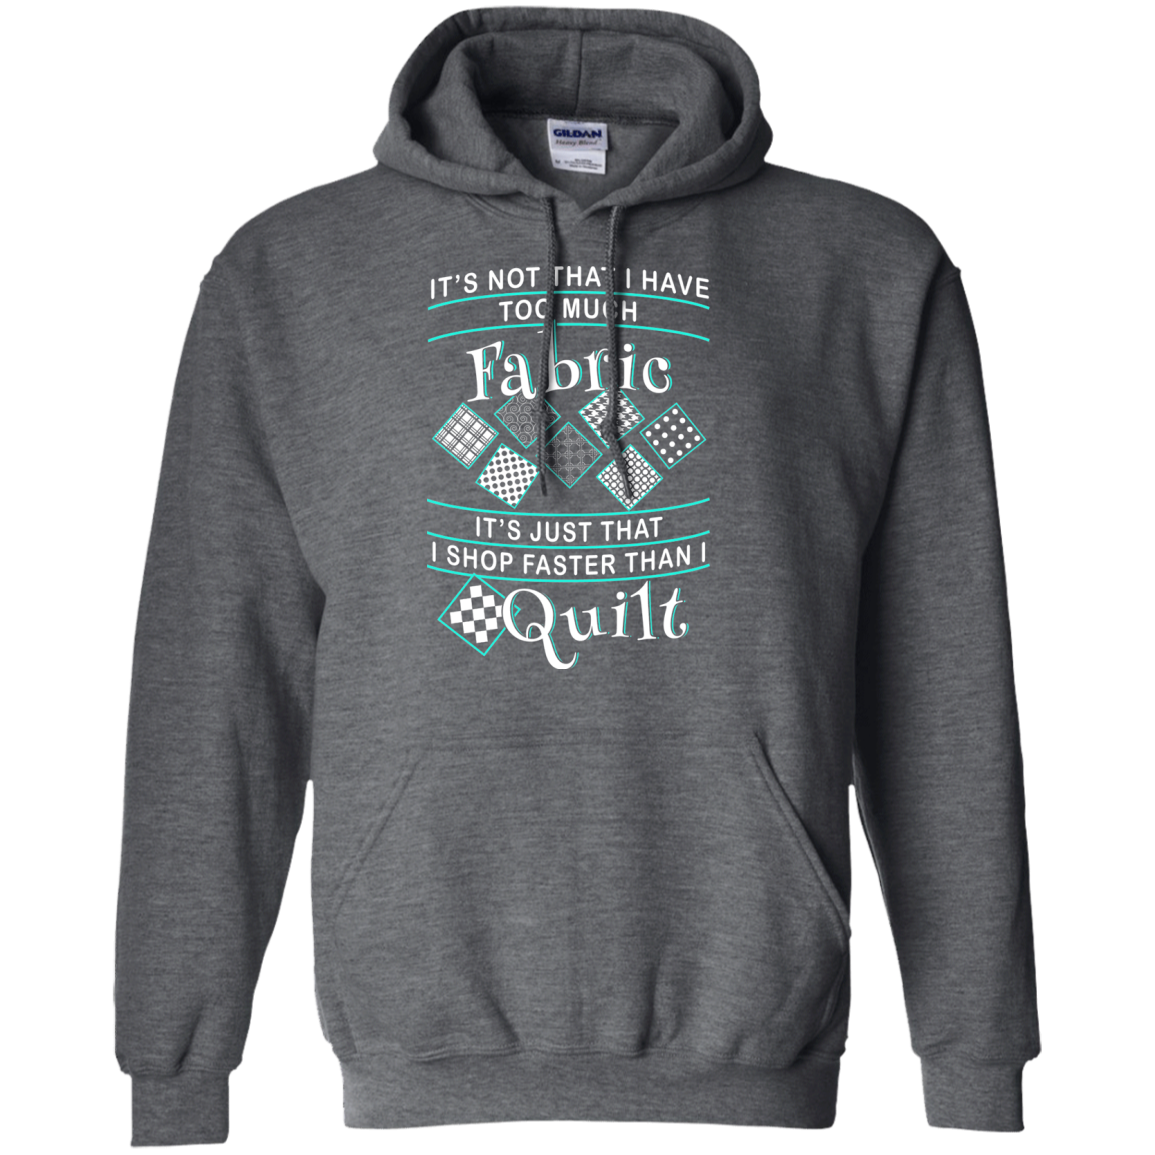 I Shop Faster than I Quilt Pullover Hoodies - Crafter4Life - 4